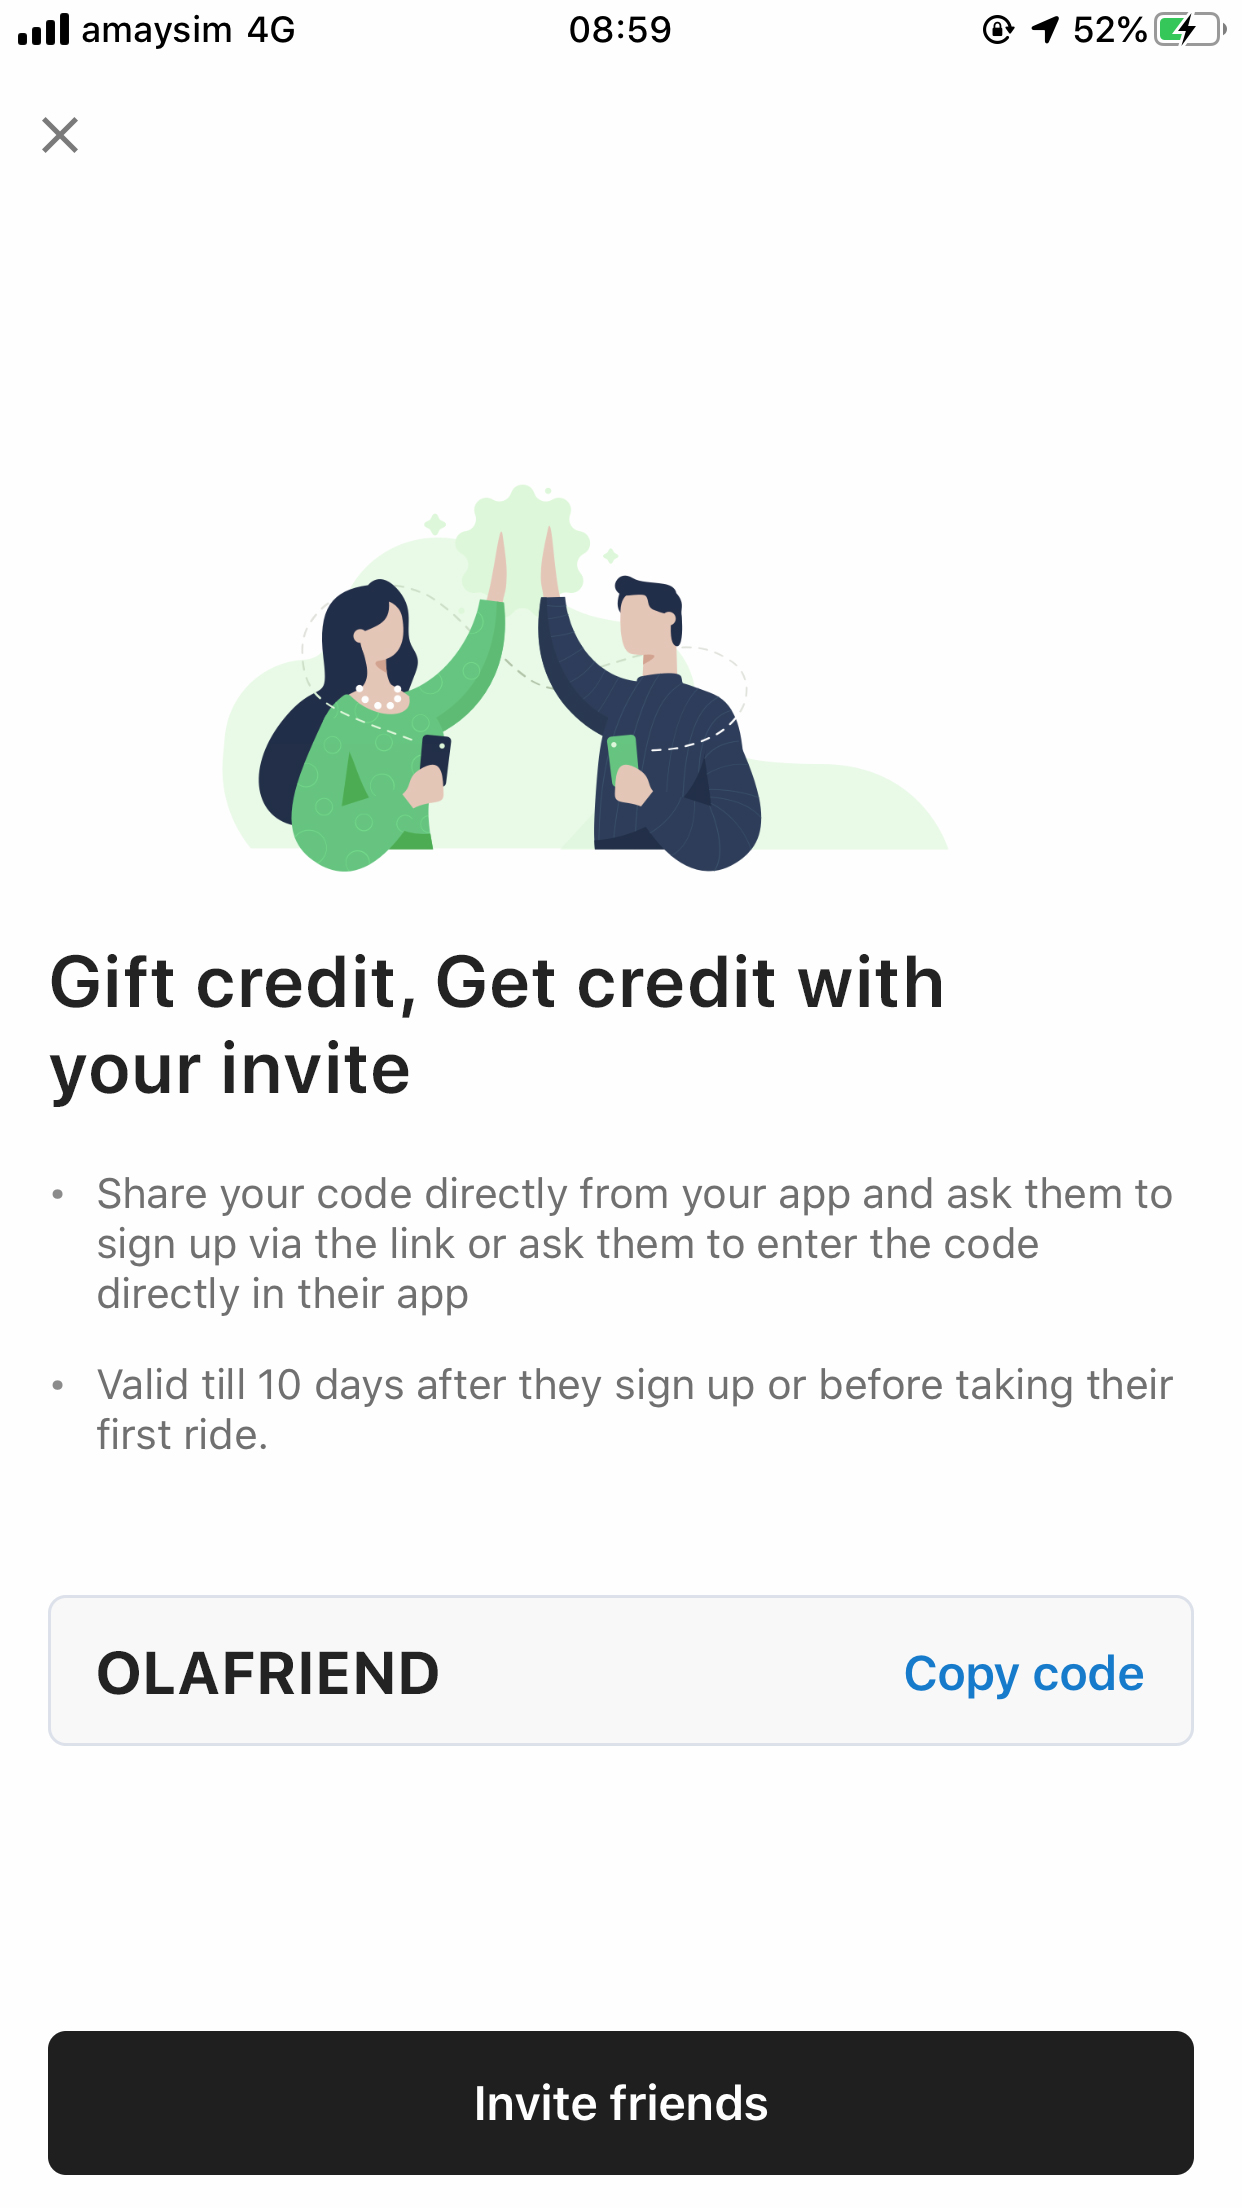 Share your referral code